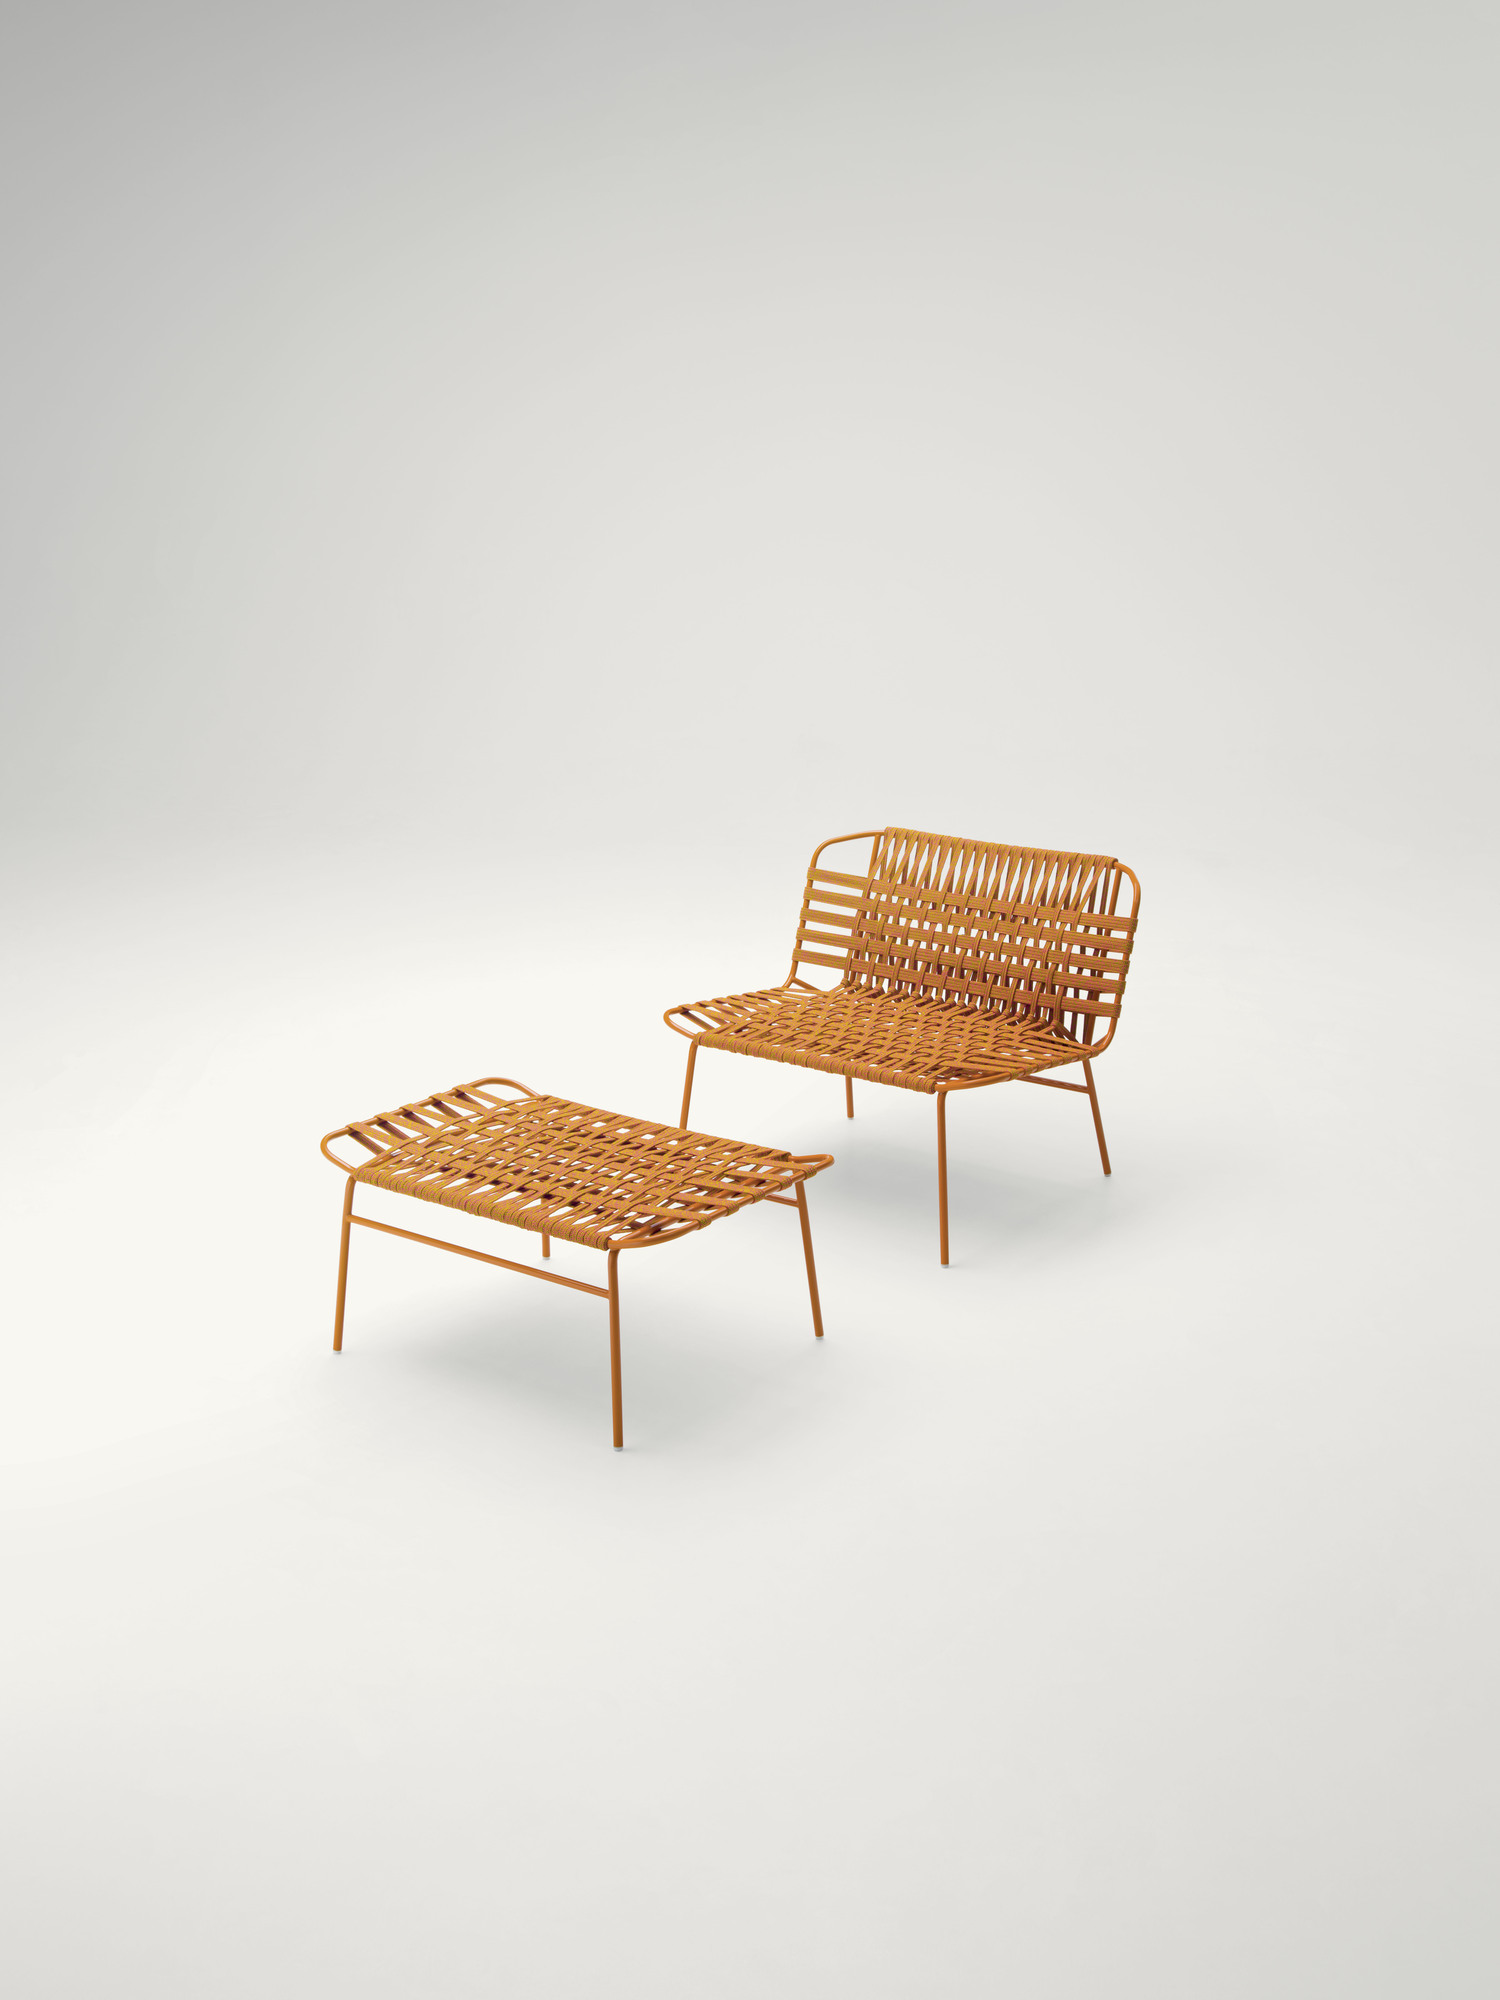 The Telar series includes chairs with and without armrests, a lounge chair, a two-seater sofa, a chaise longue, a sun bed and a pouf. The structure is made of gloss varnished stainless steel, the upholstery is fixed and hand woven using elastic belts of different dimensions covered with a braid in Rope yarn. This structural weave is available in two different versions, which are produced with elastic belts with two different dimensions. The Telar series has been awarded with the Red Dot Best of the Best Award and has been finalist for the NYCxDesign Awards, both in 2020. © PAOLA LENTI SRL/SERGIO CHIMENTI